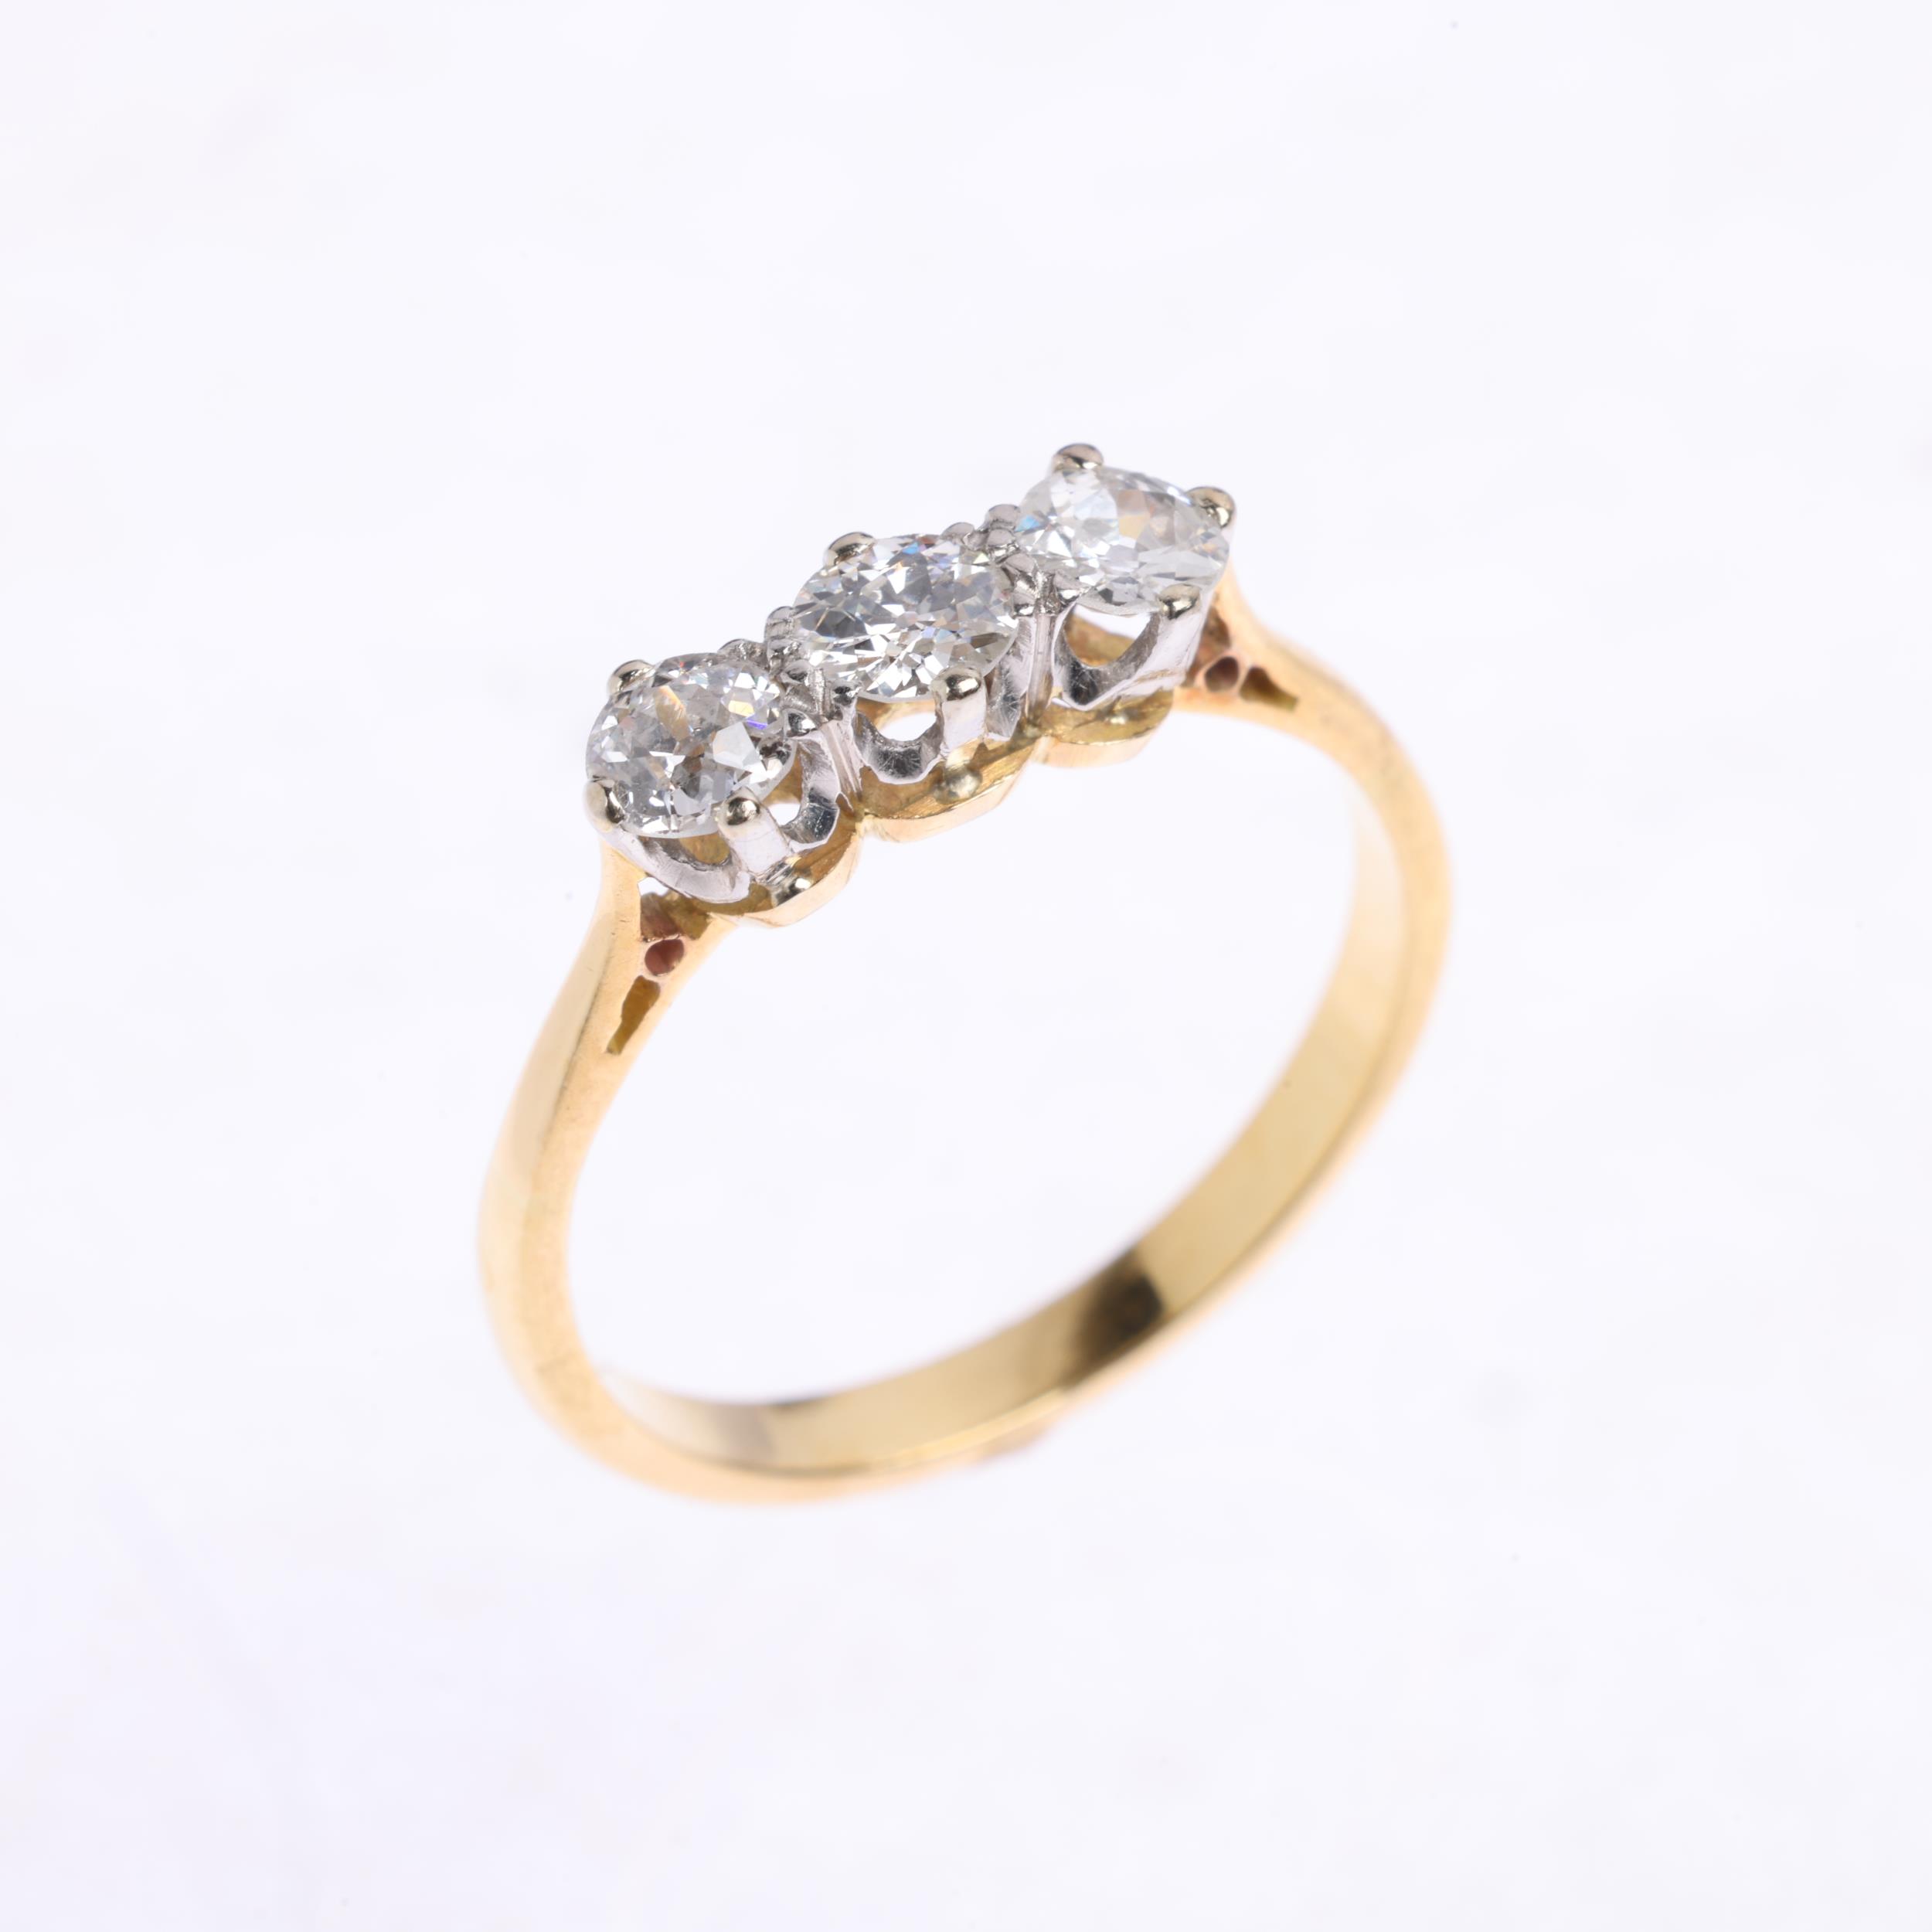 A three stone diamond ring, claw set with old European-cut diamonds, total diamond content approx - Image 2 of 4